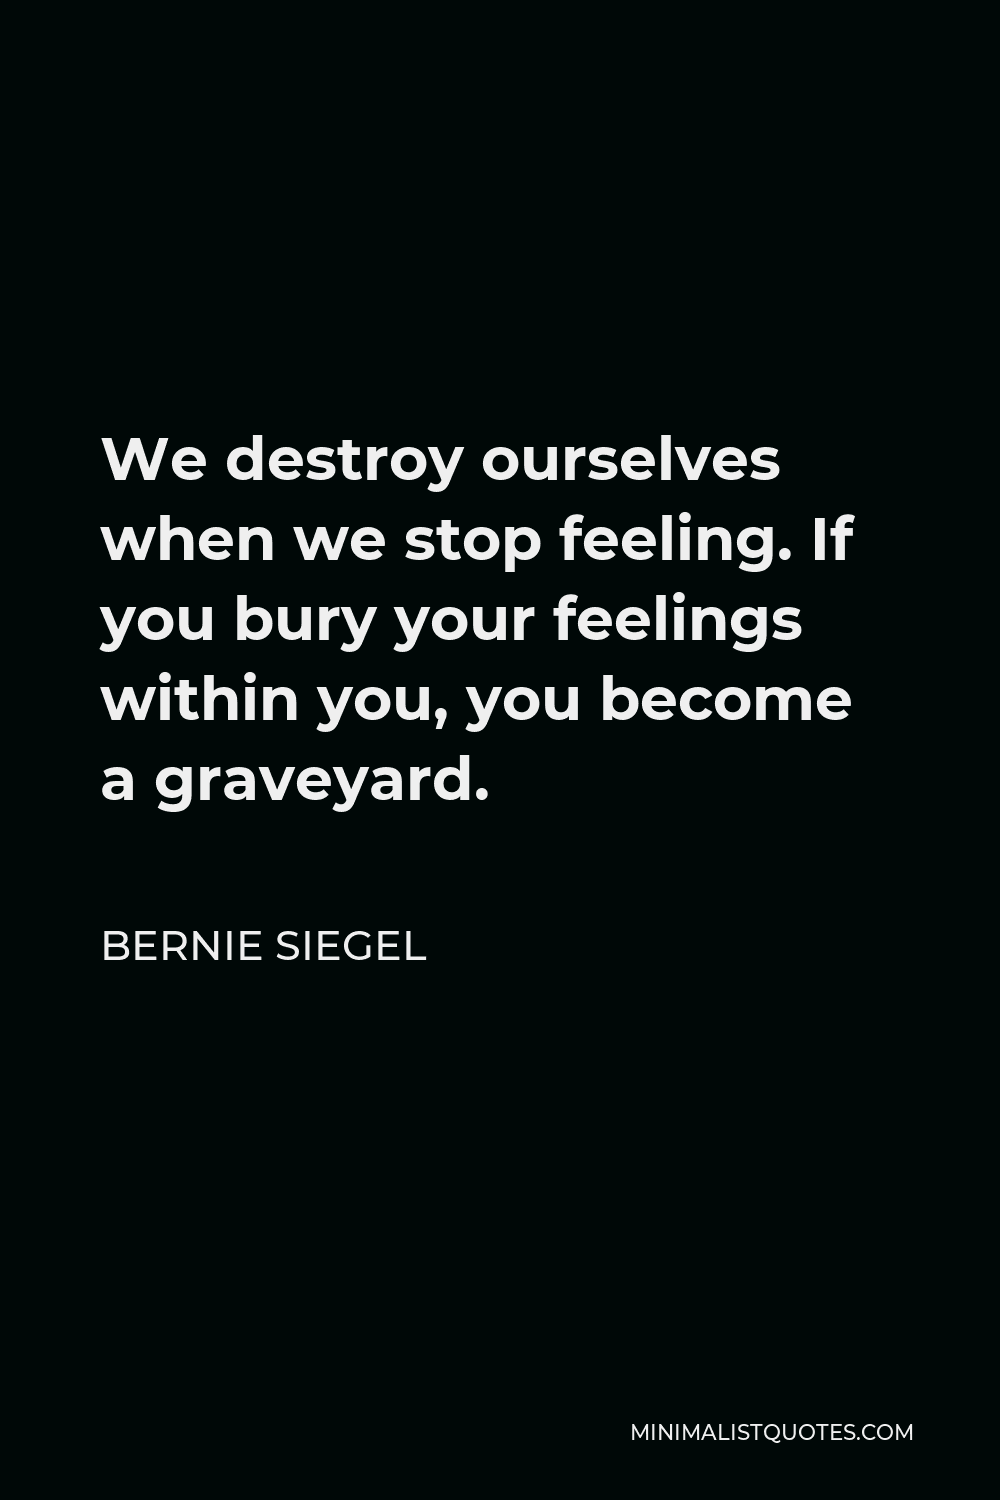 Bernie Siegel Quote - We destroy ourselves when we stop feeling. If you bury your feelings within you, you become a graveyard.